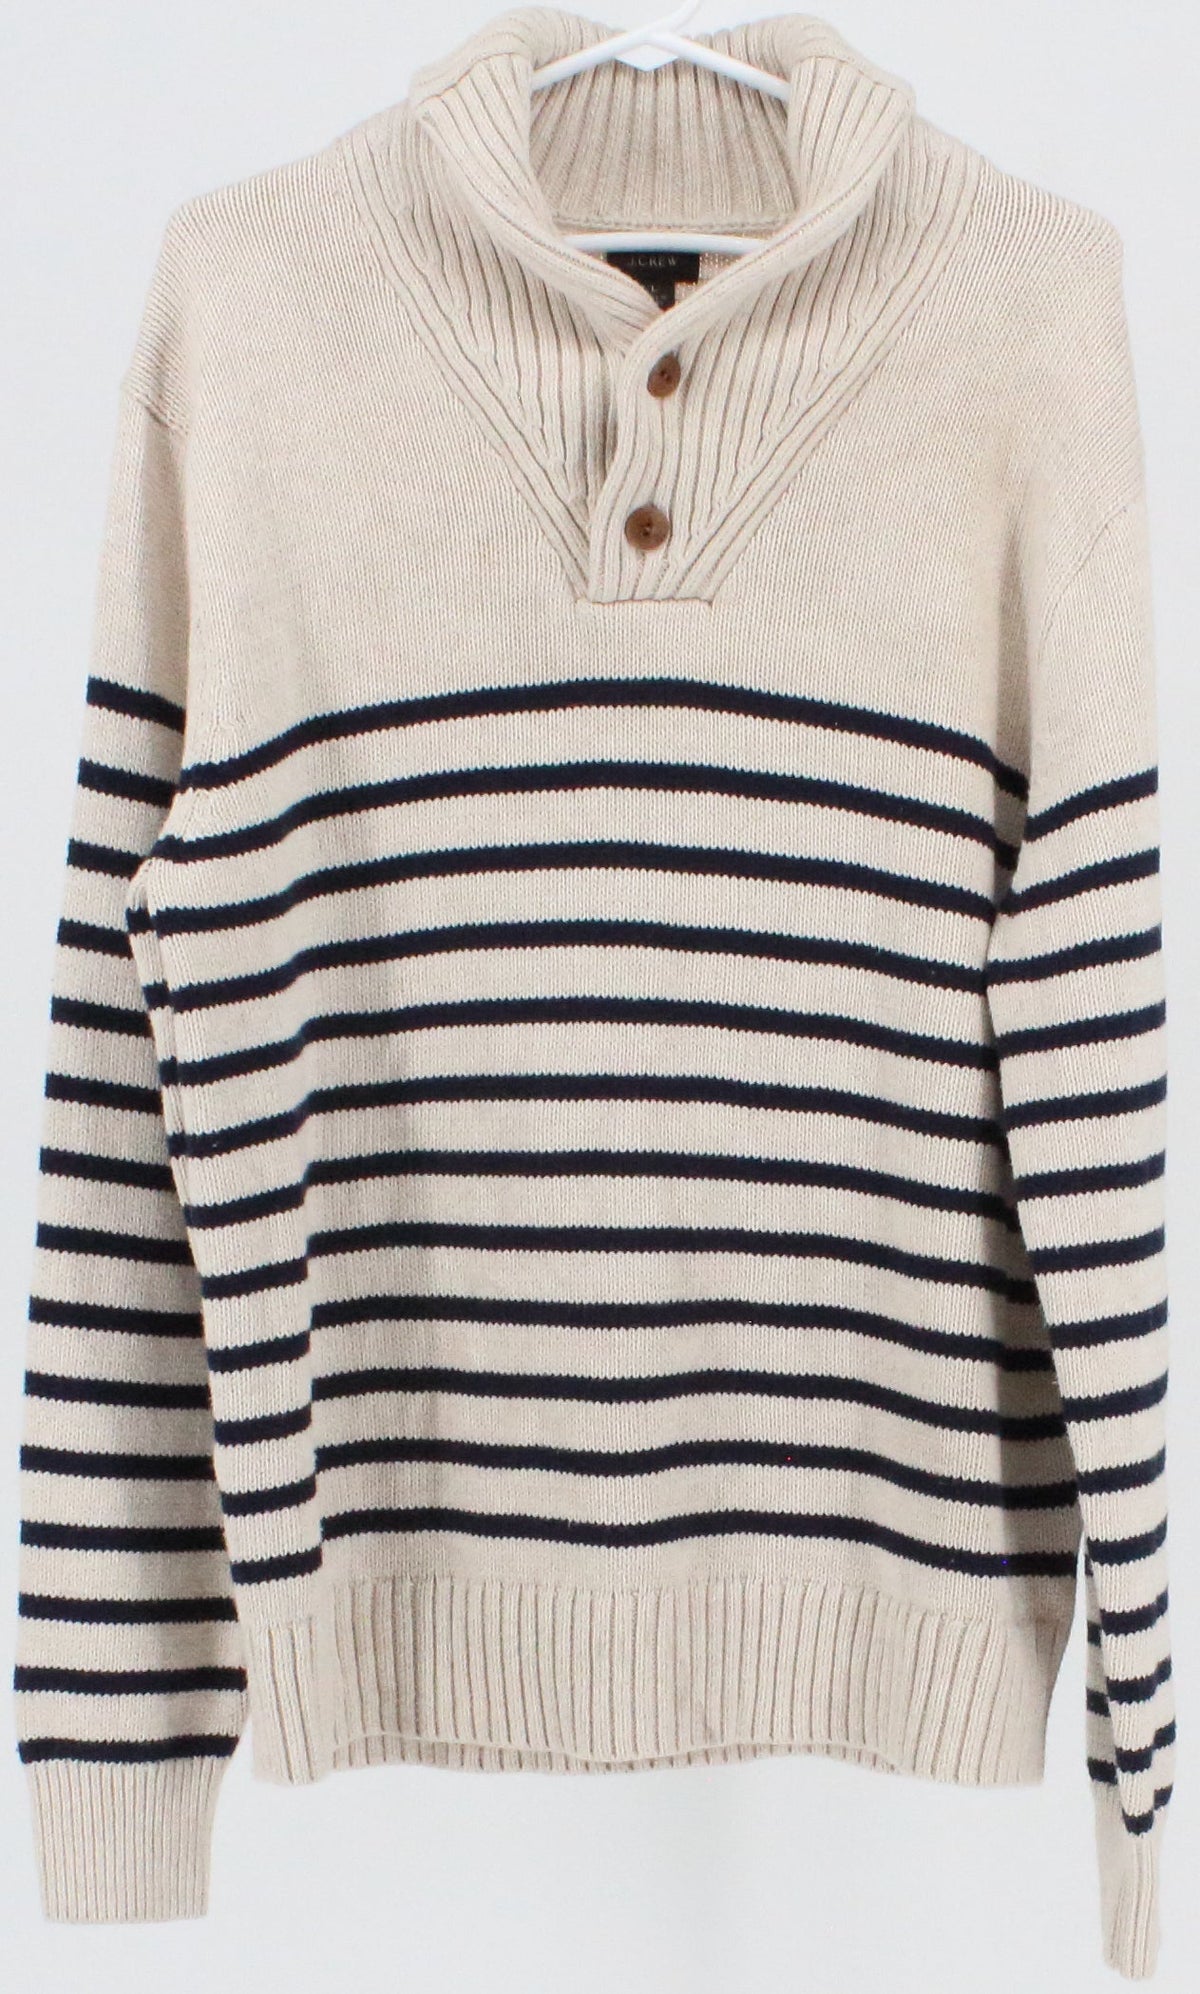 J Crew Beige and Navy Blue Striped Sweater